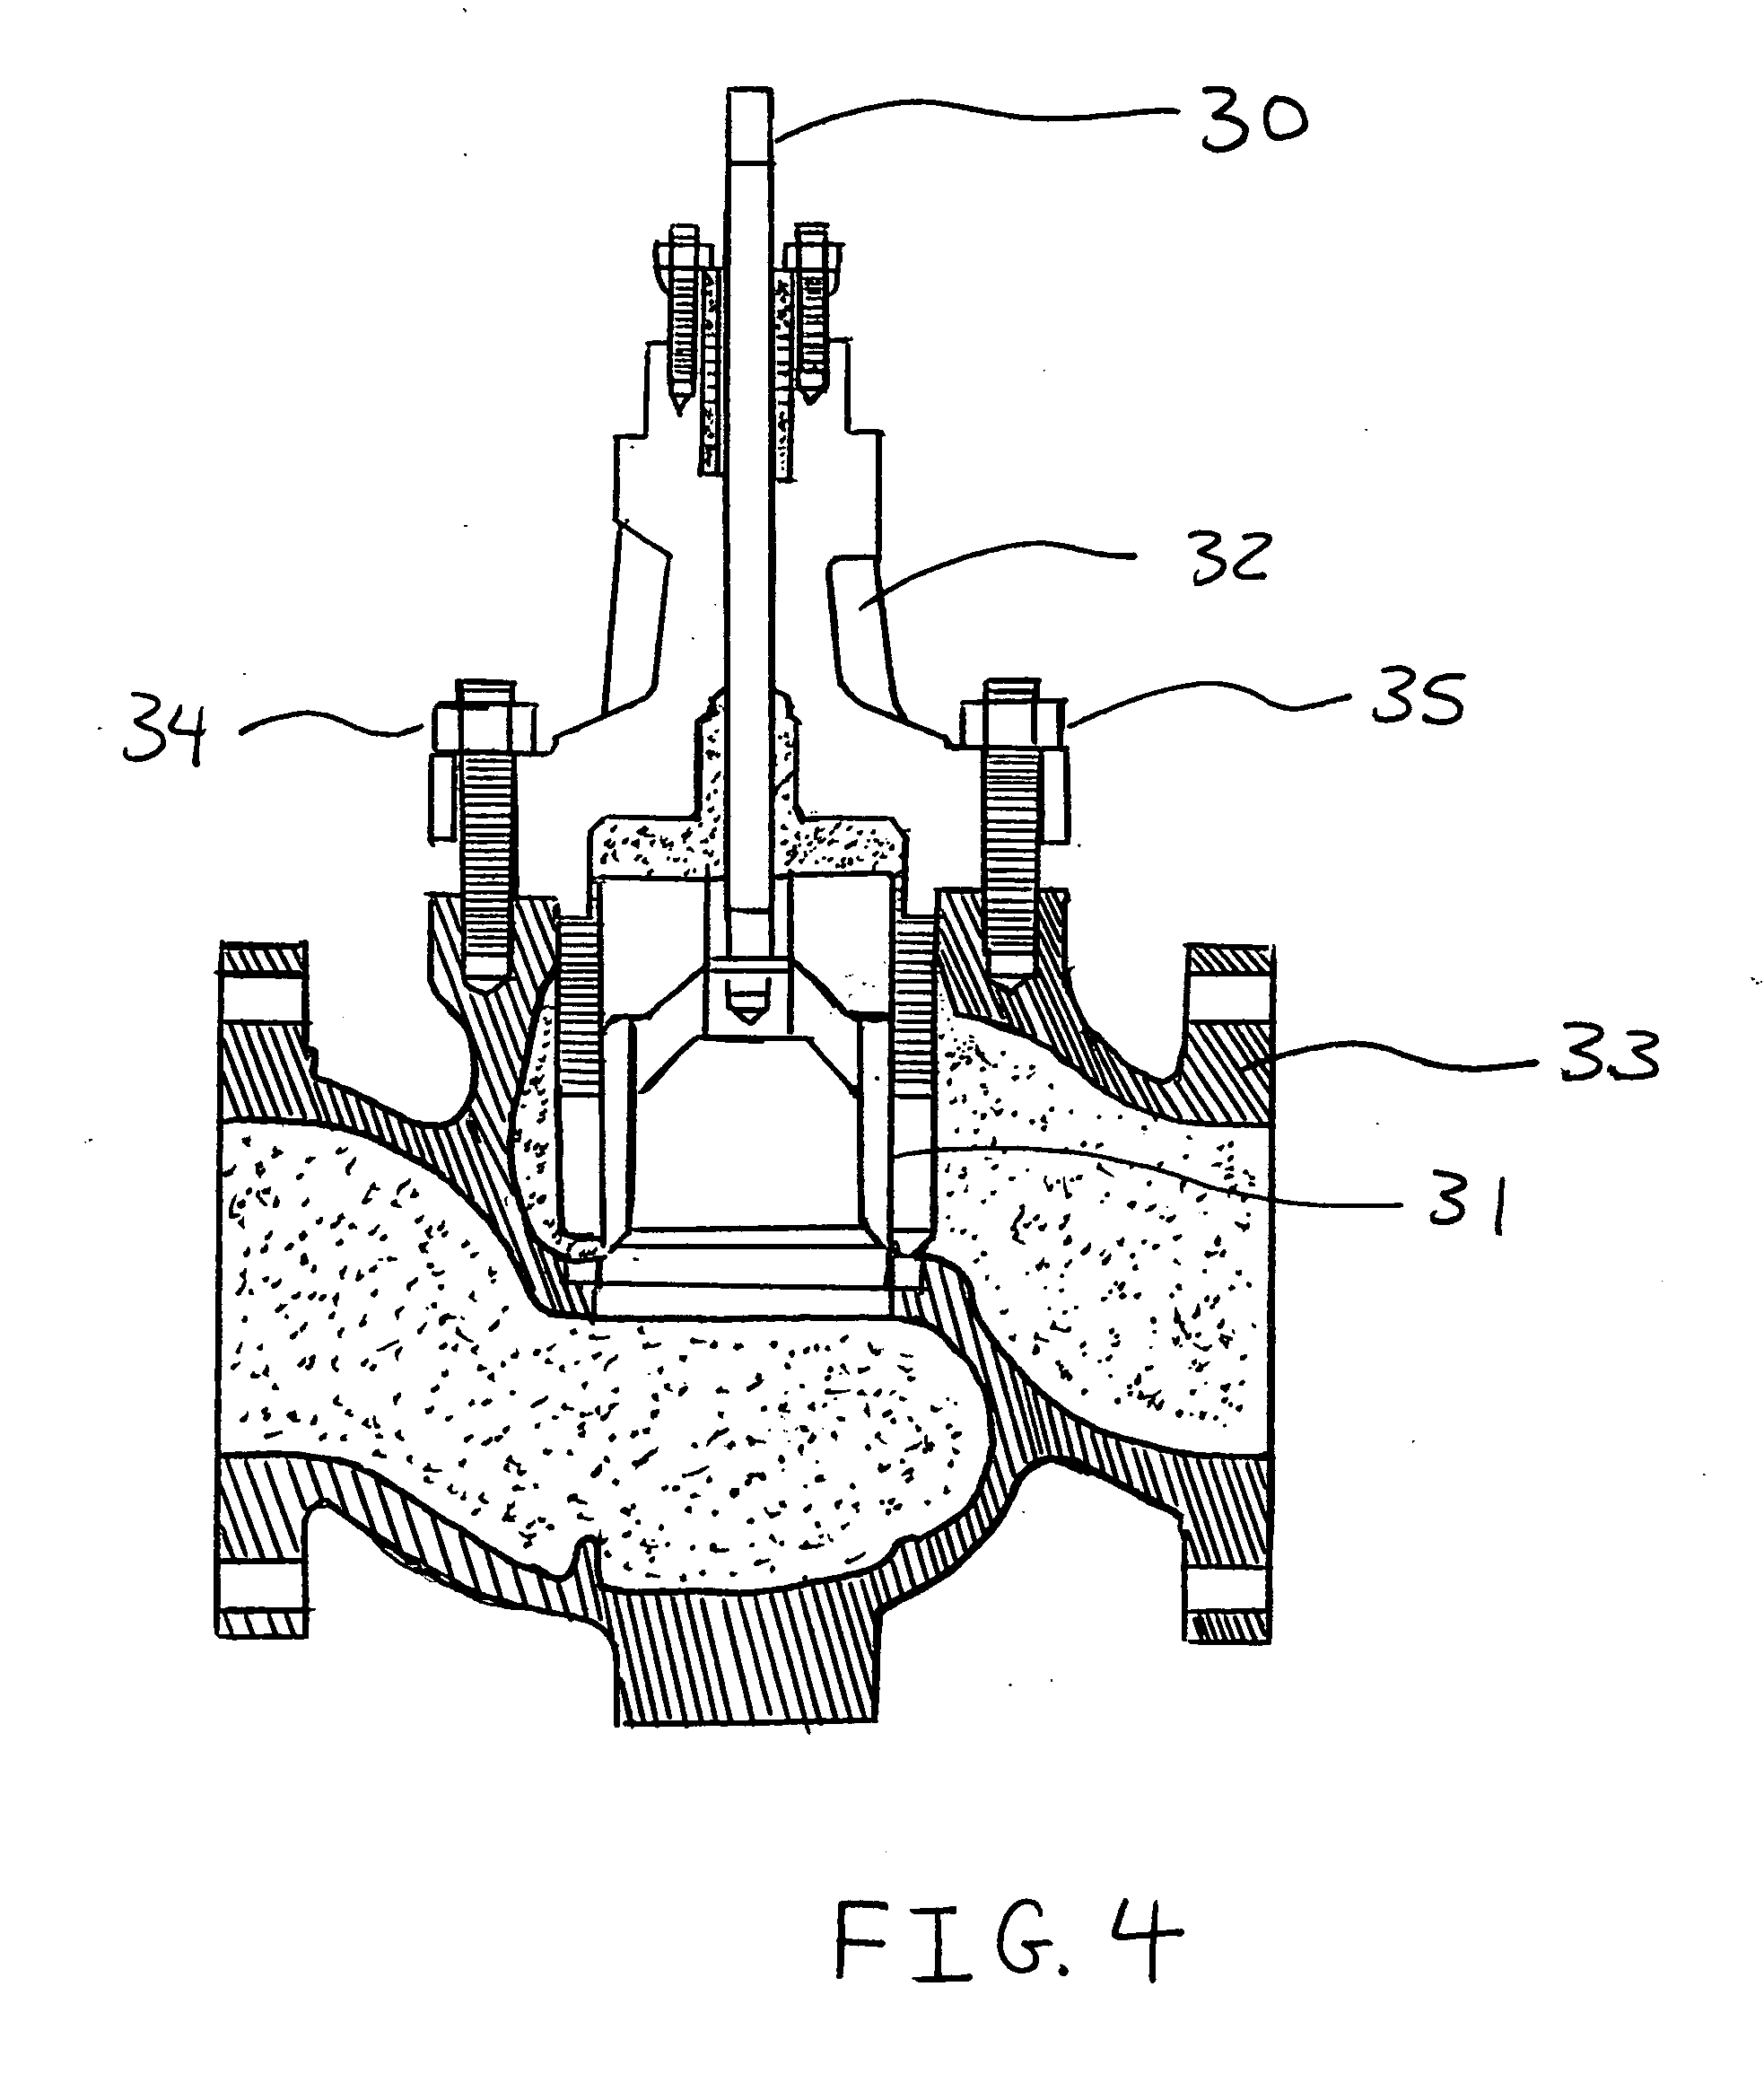 Inline control valve with rack and pinion movement